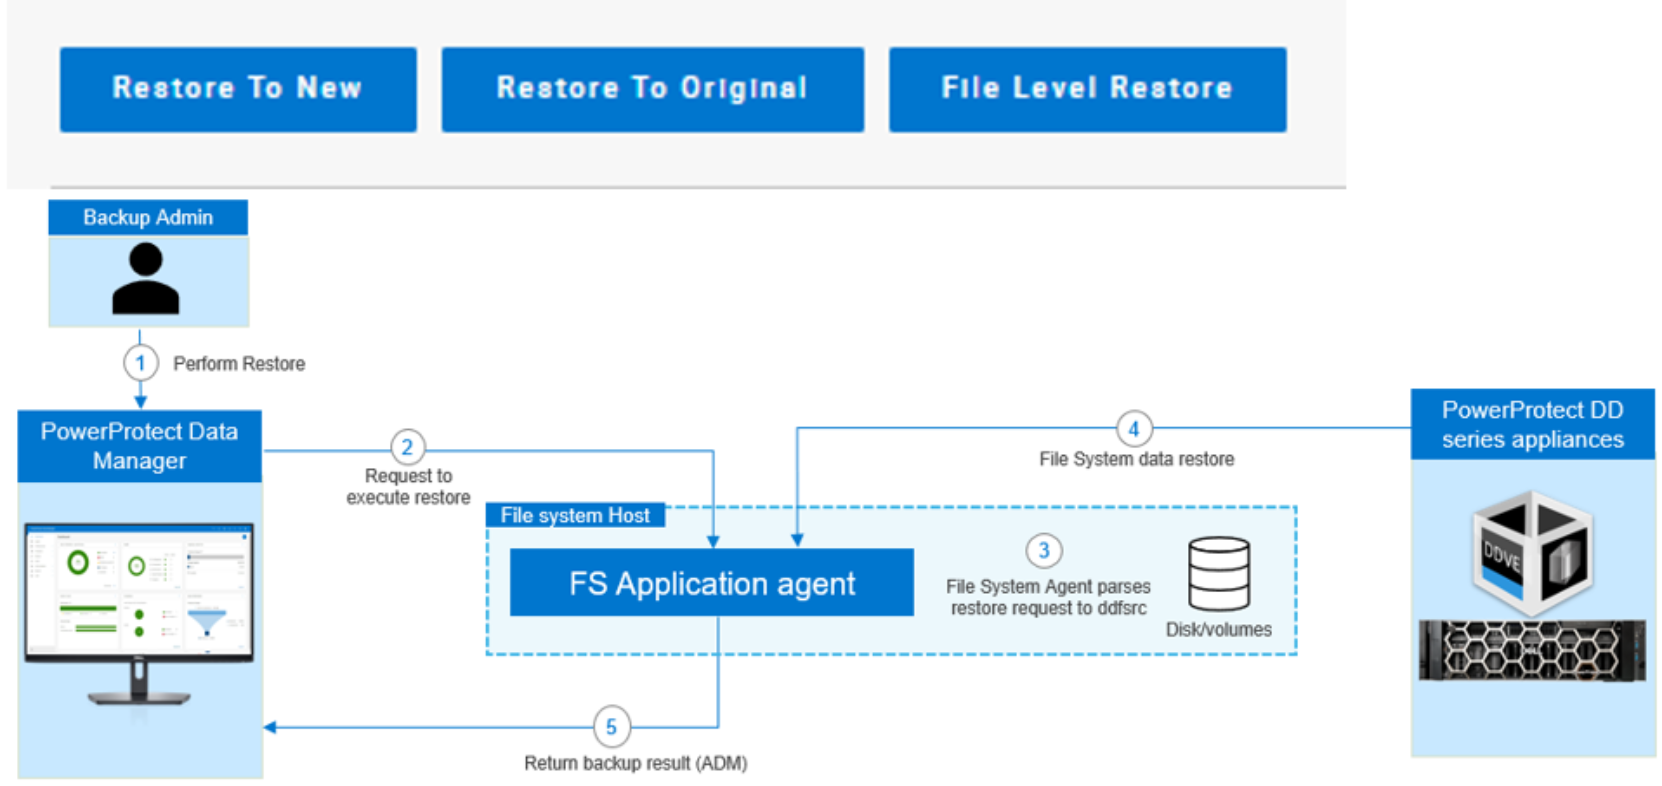 Image shows the centralized file system restore workflow 